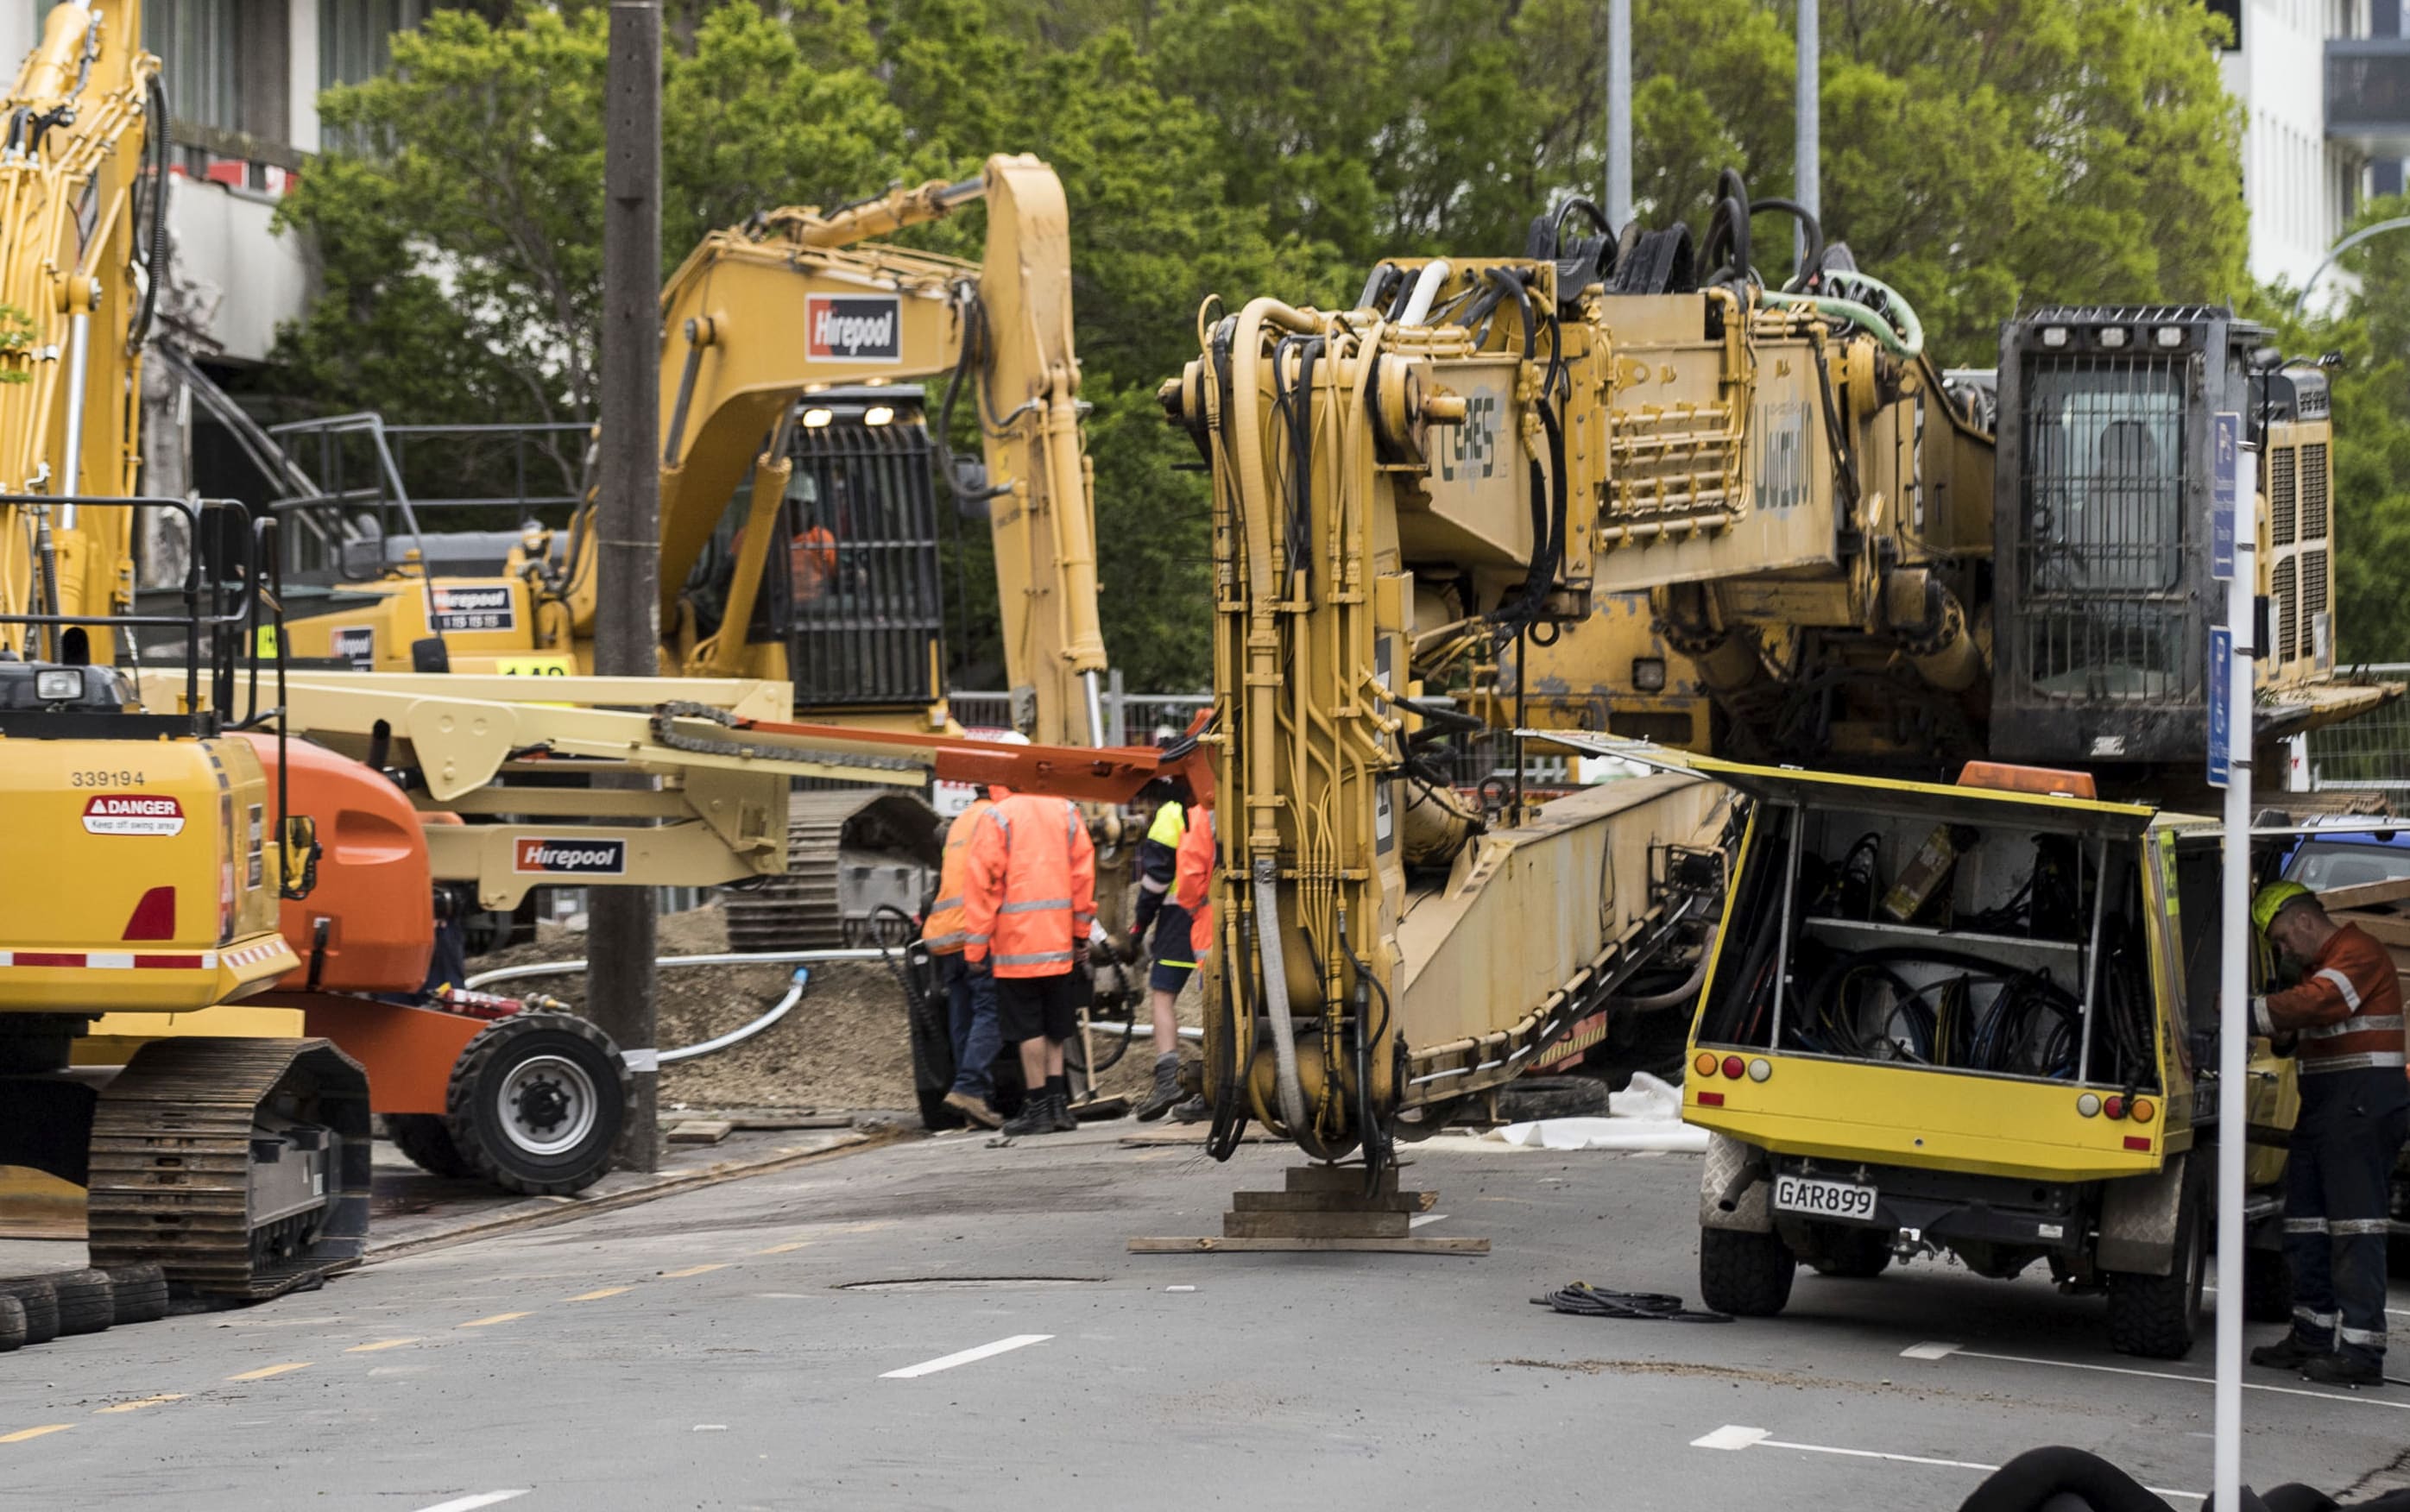 Construction vehicles at work on demolishing 61 Molesworth Street in central Wellington after it was damaged in the Kaikōura earthquake.